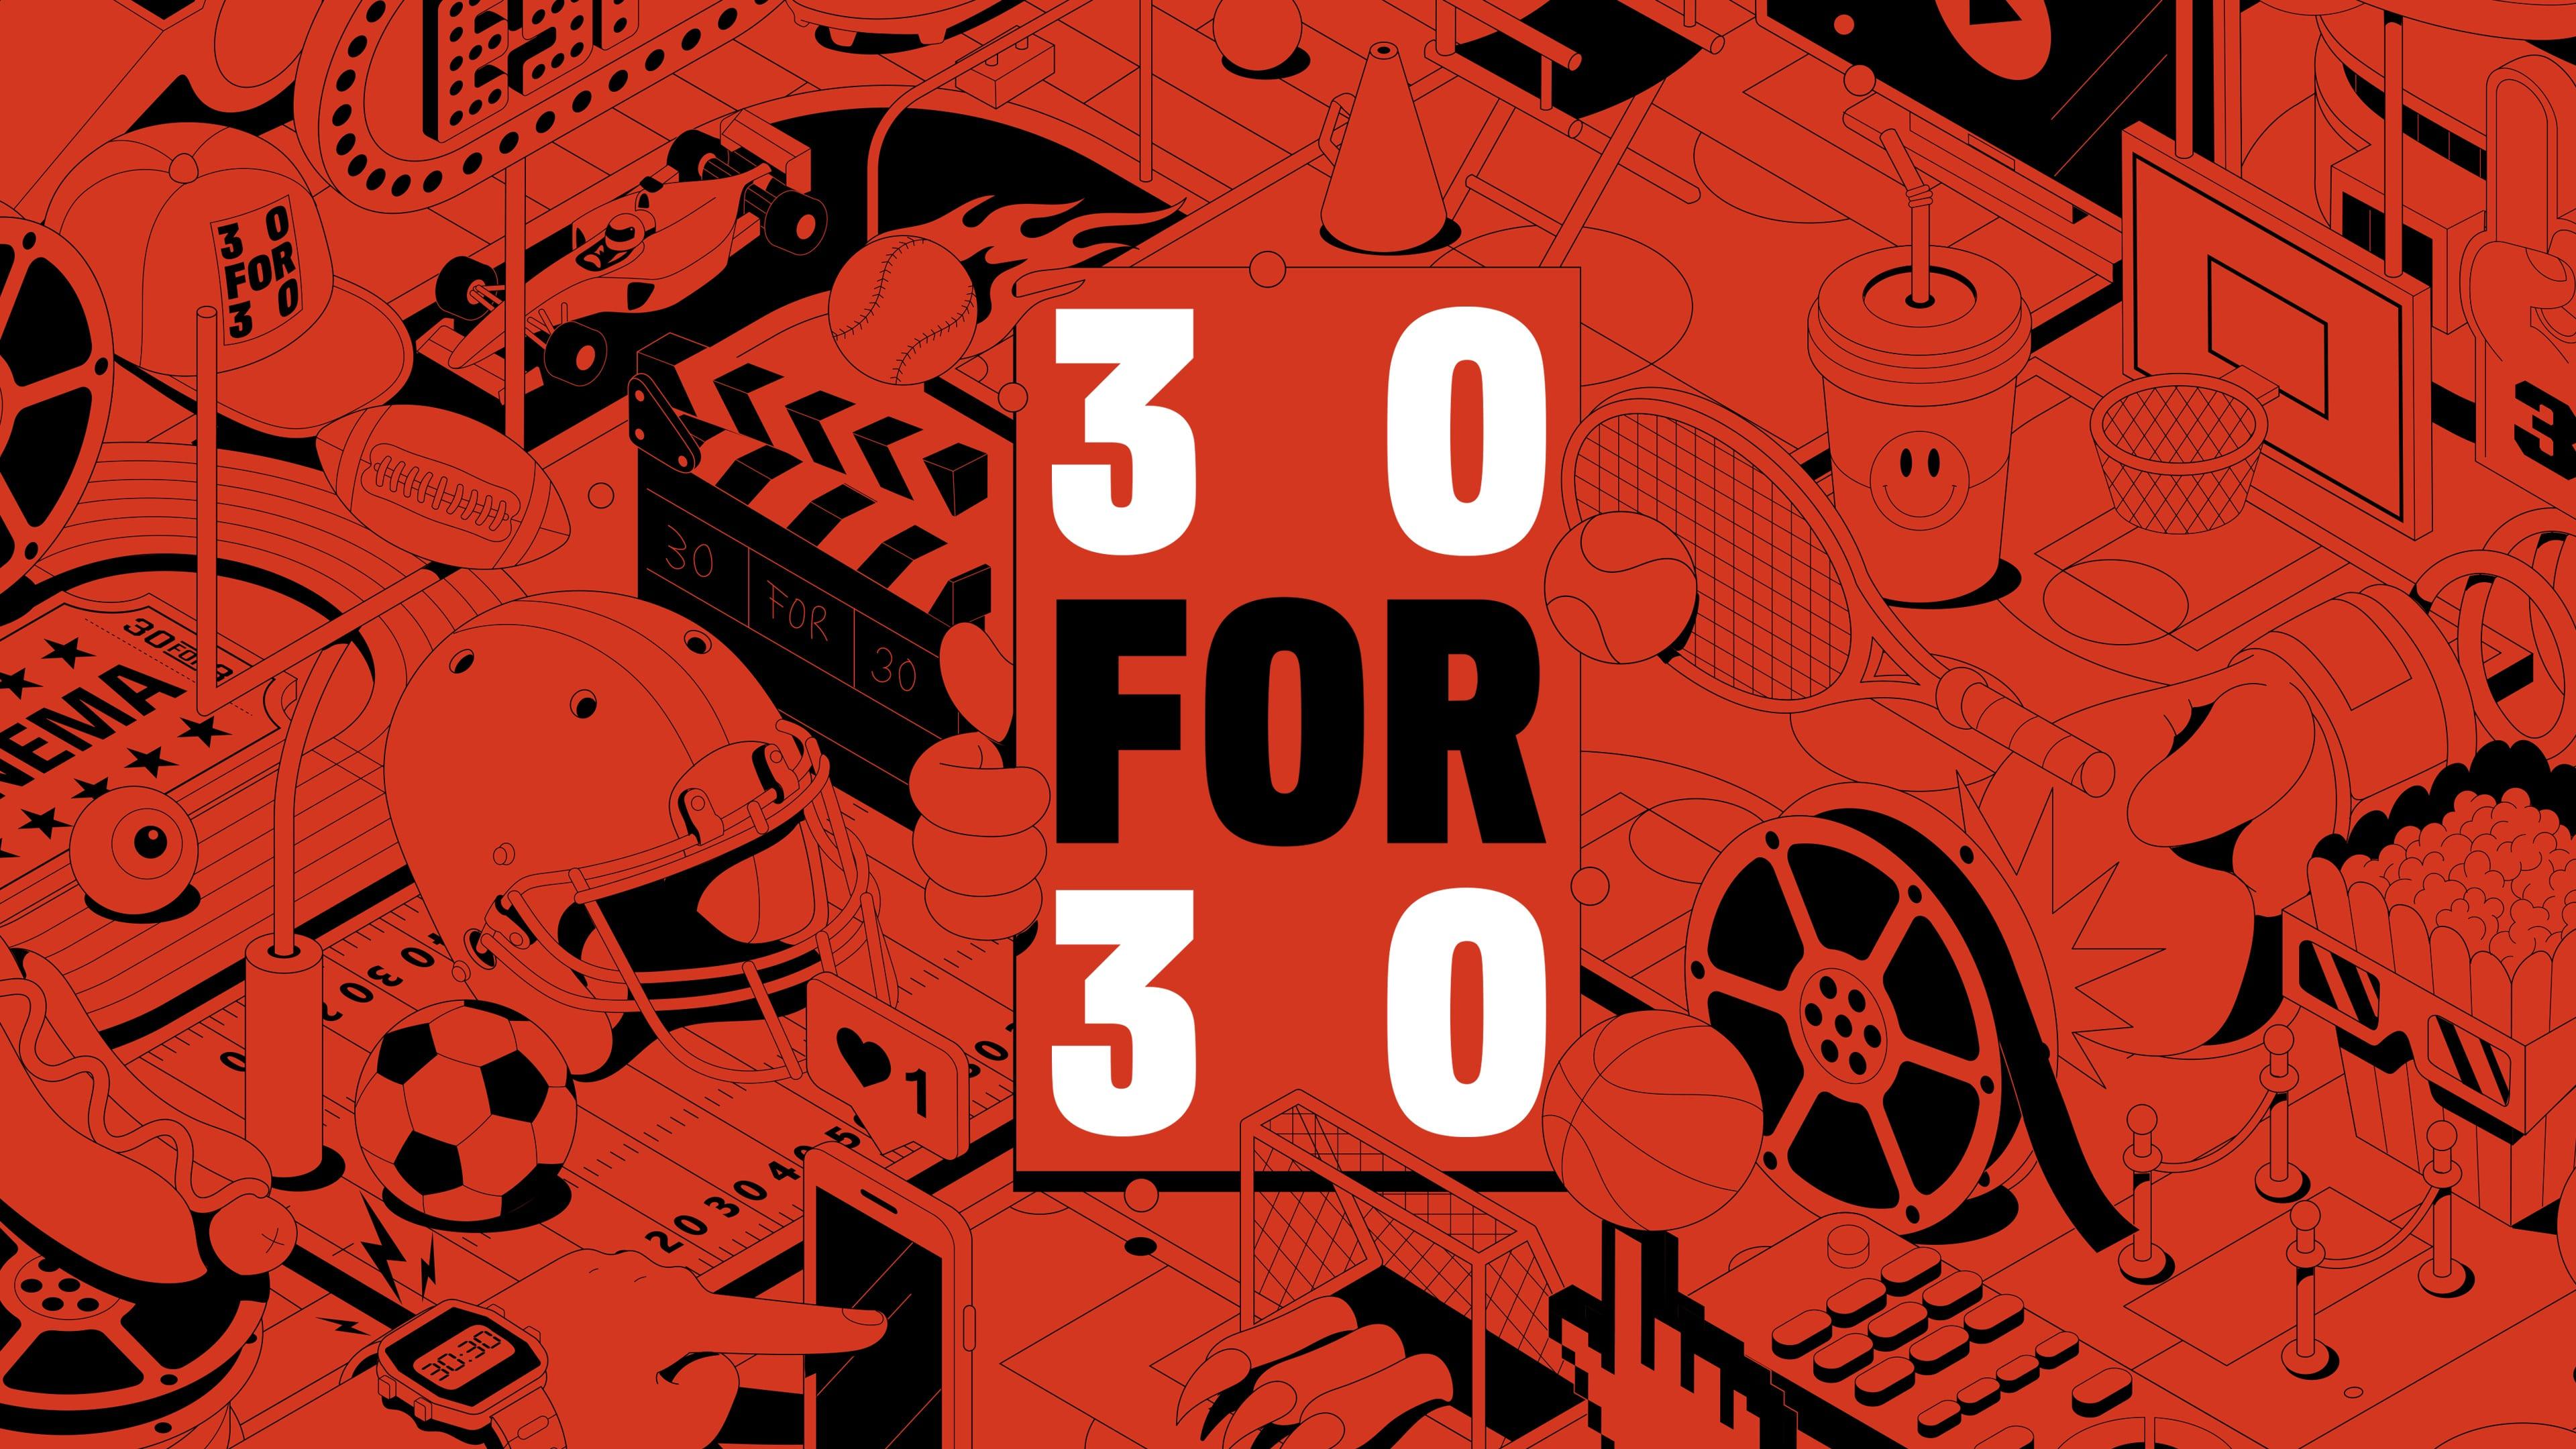 30 for 30 list of episodes